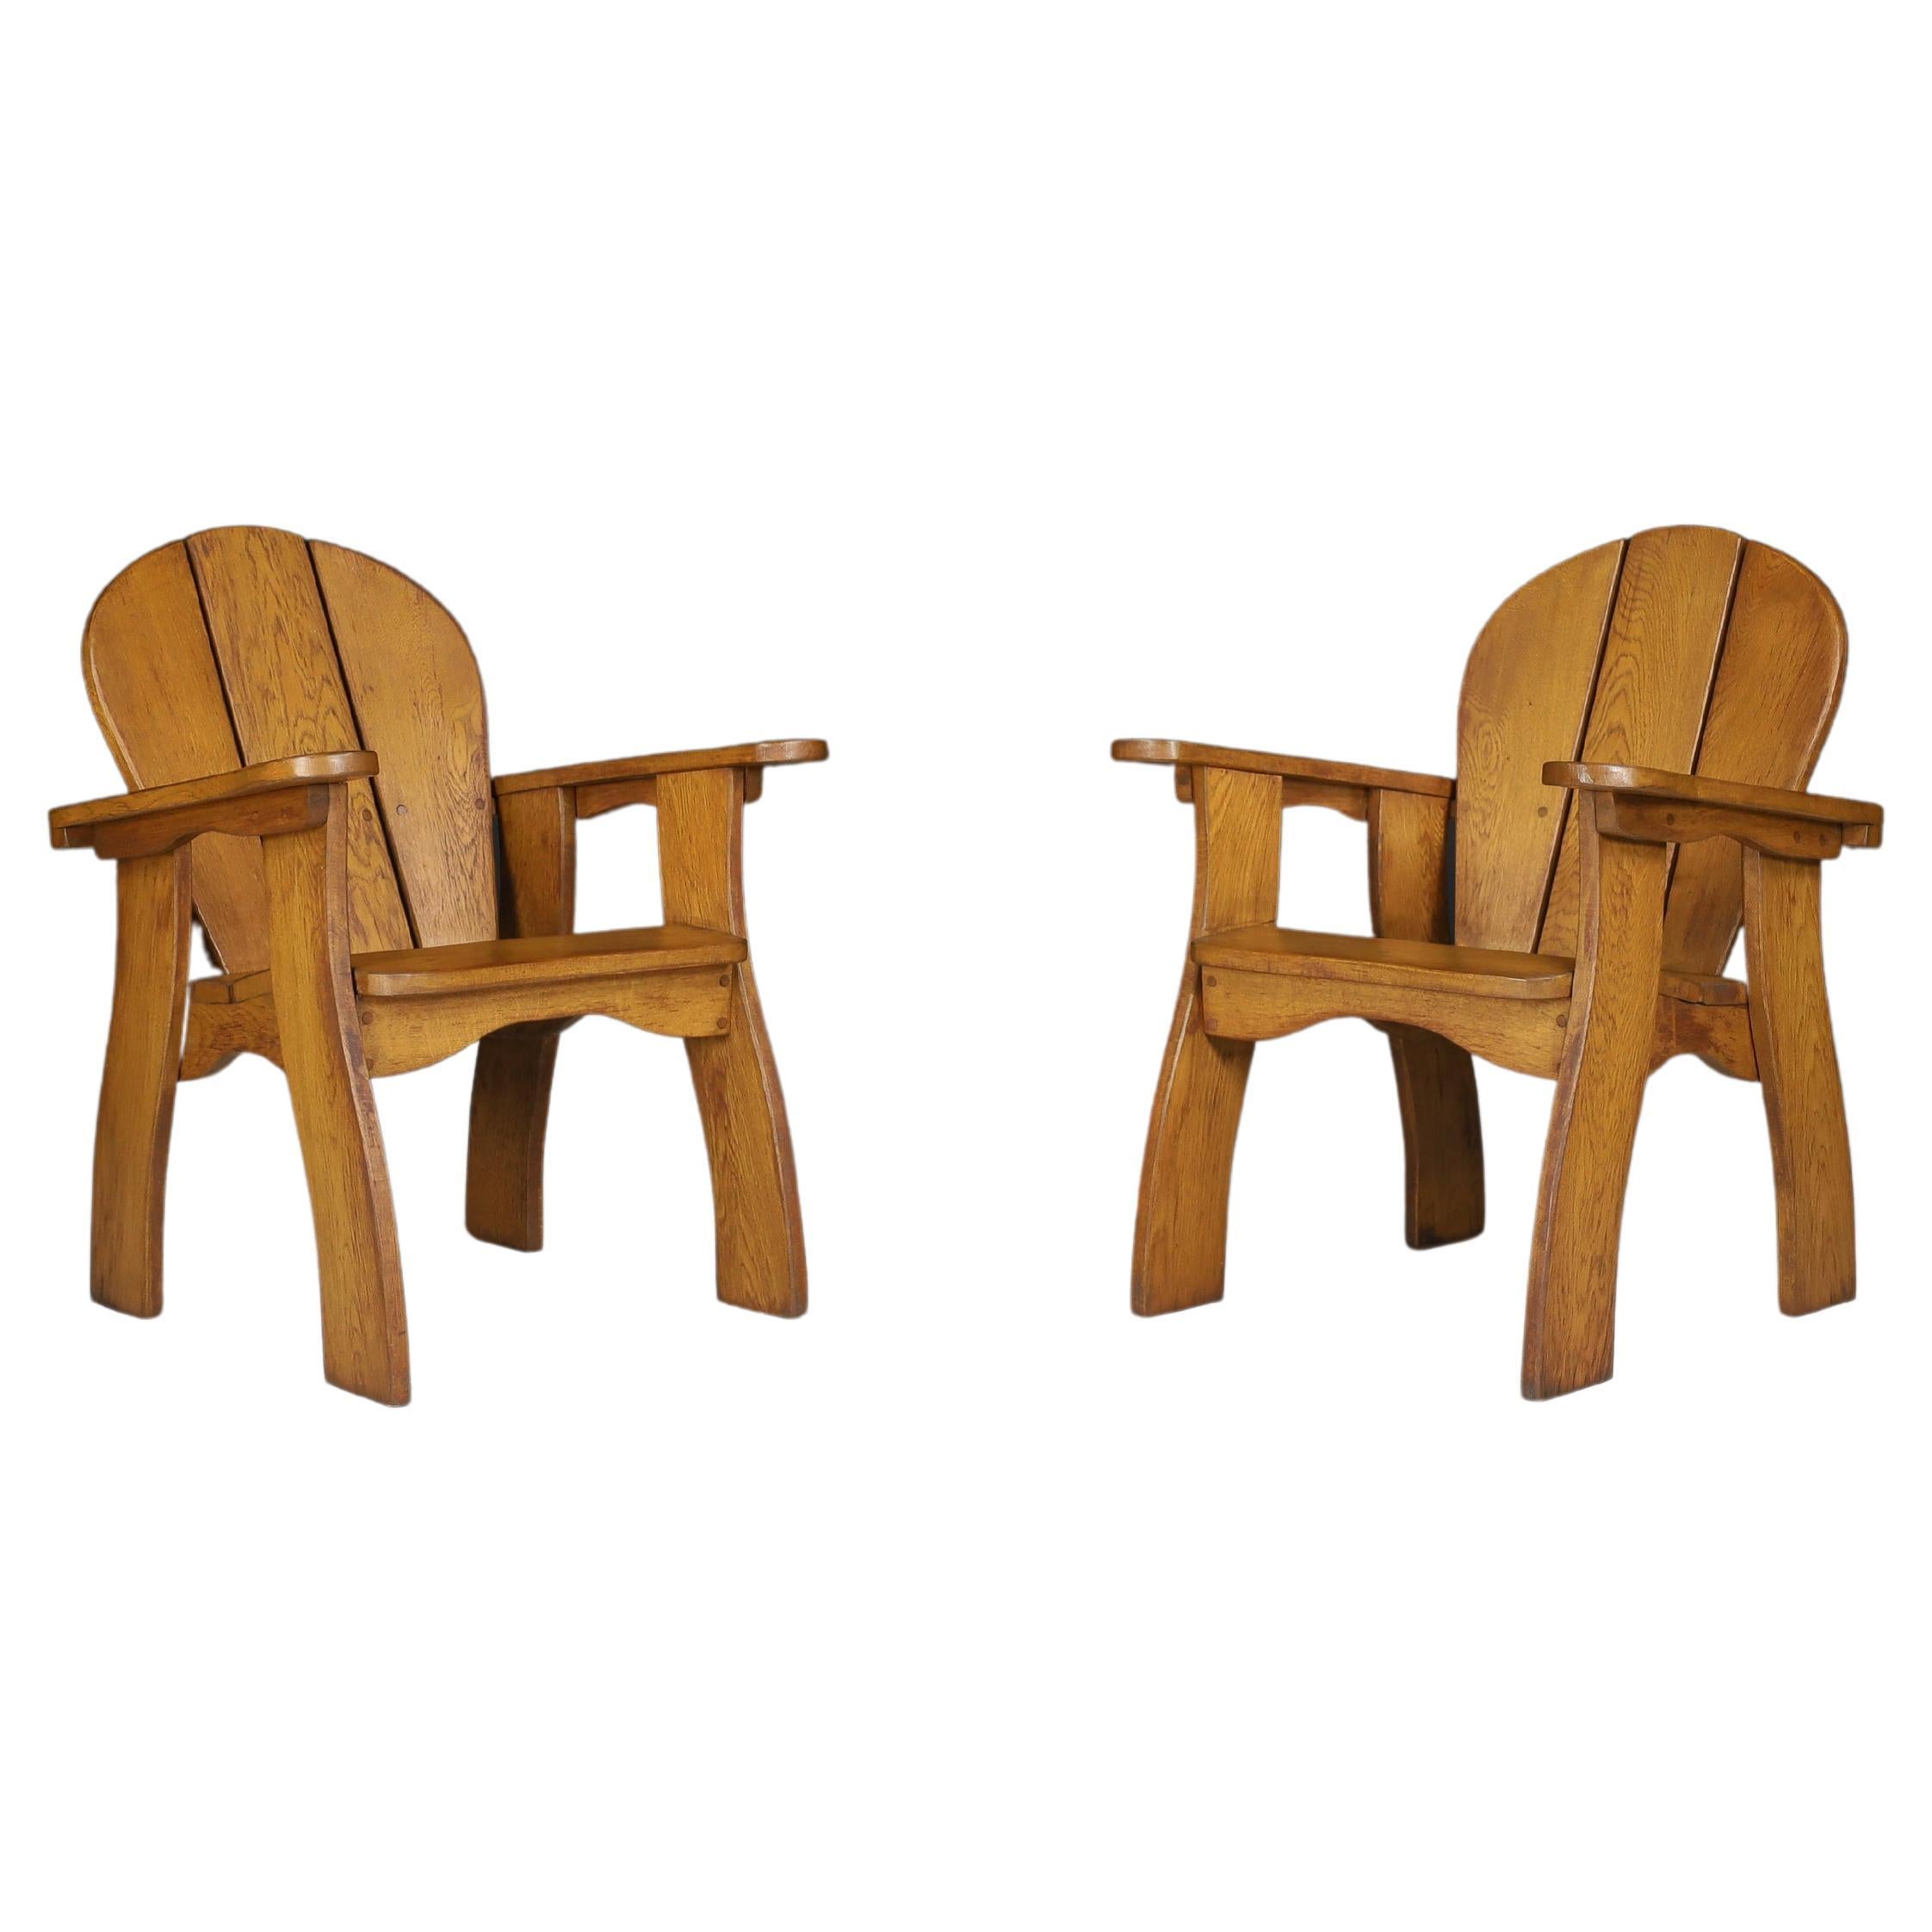 Sculptural Armchairs in Oak, France, 1960s For Sale